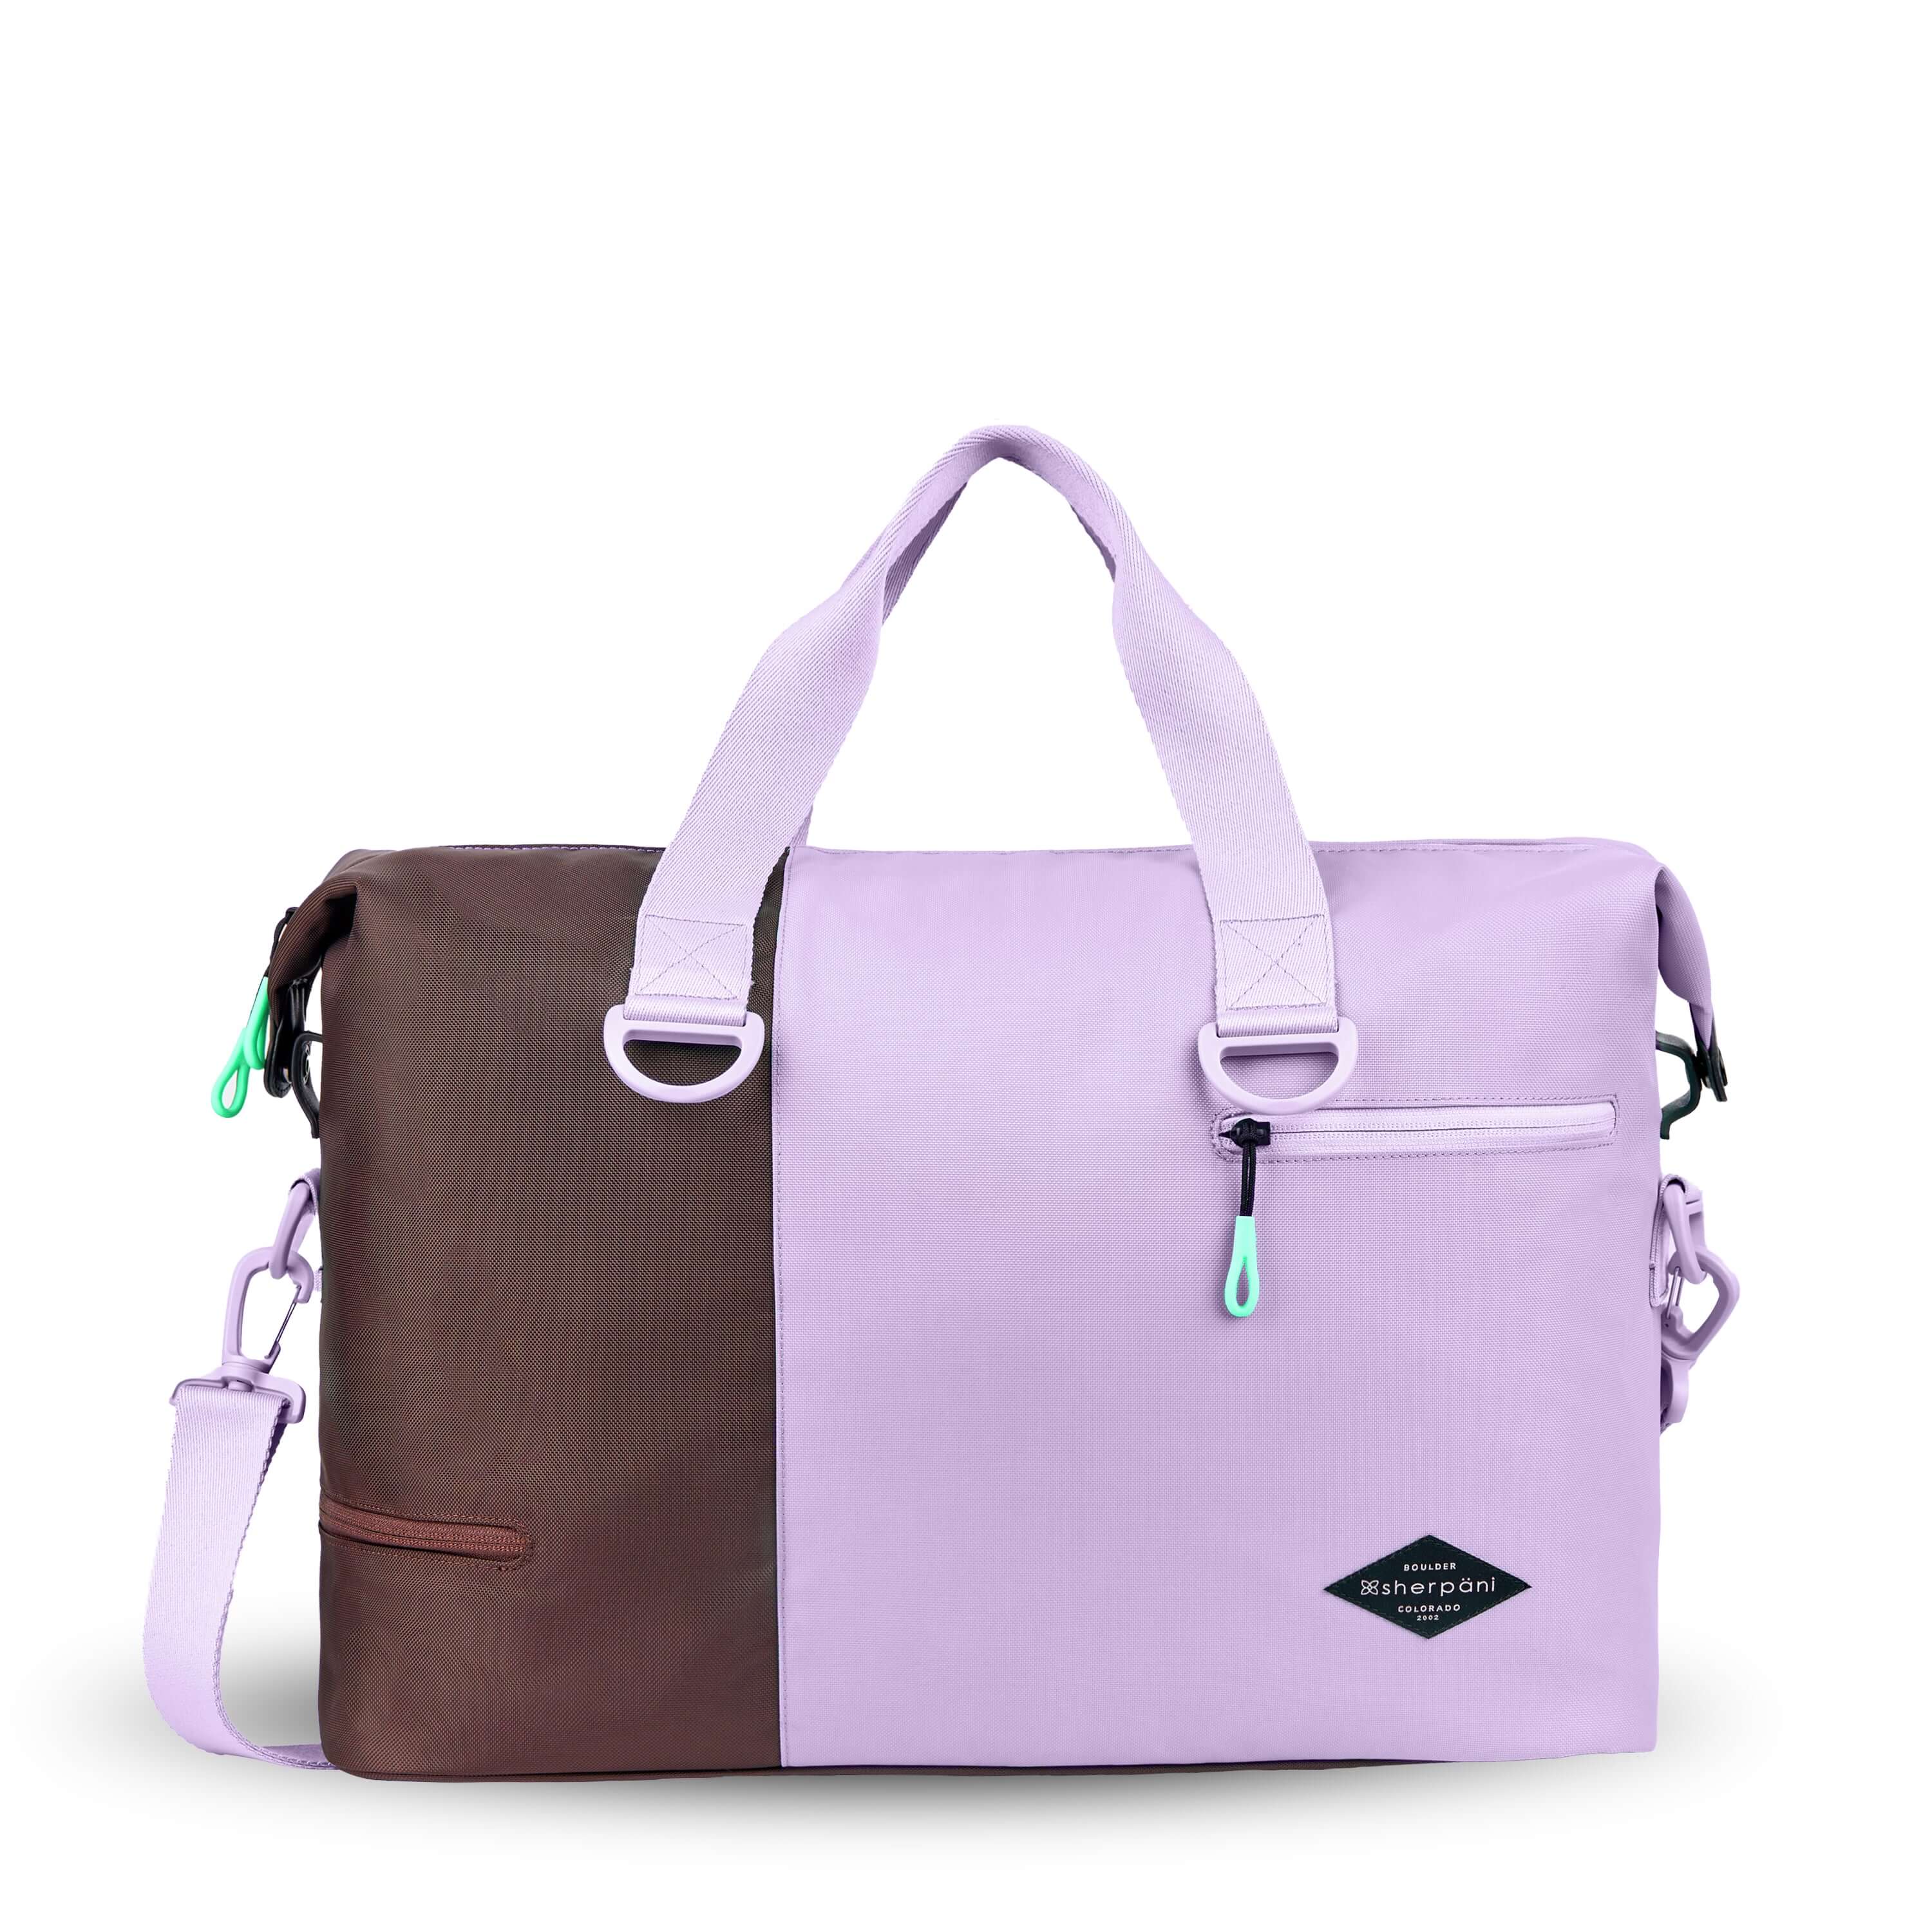 Flat front view of Sherpani bag, the Sola in Lavender. The bag is two-toned in lavender and brown. Two external zipper compartments are visible on the top right and bottom left of the bag. Easy-pull zippers are accented in aqua. The bag has tote handles and an adjustable/detachable crossbody strap.